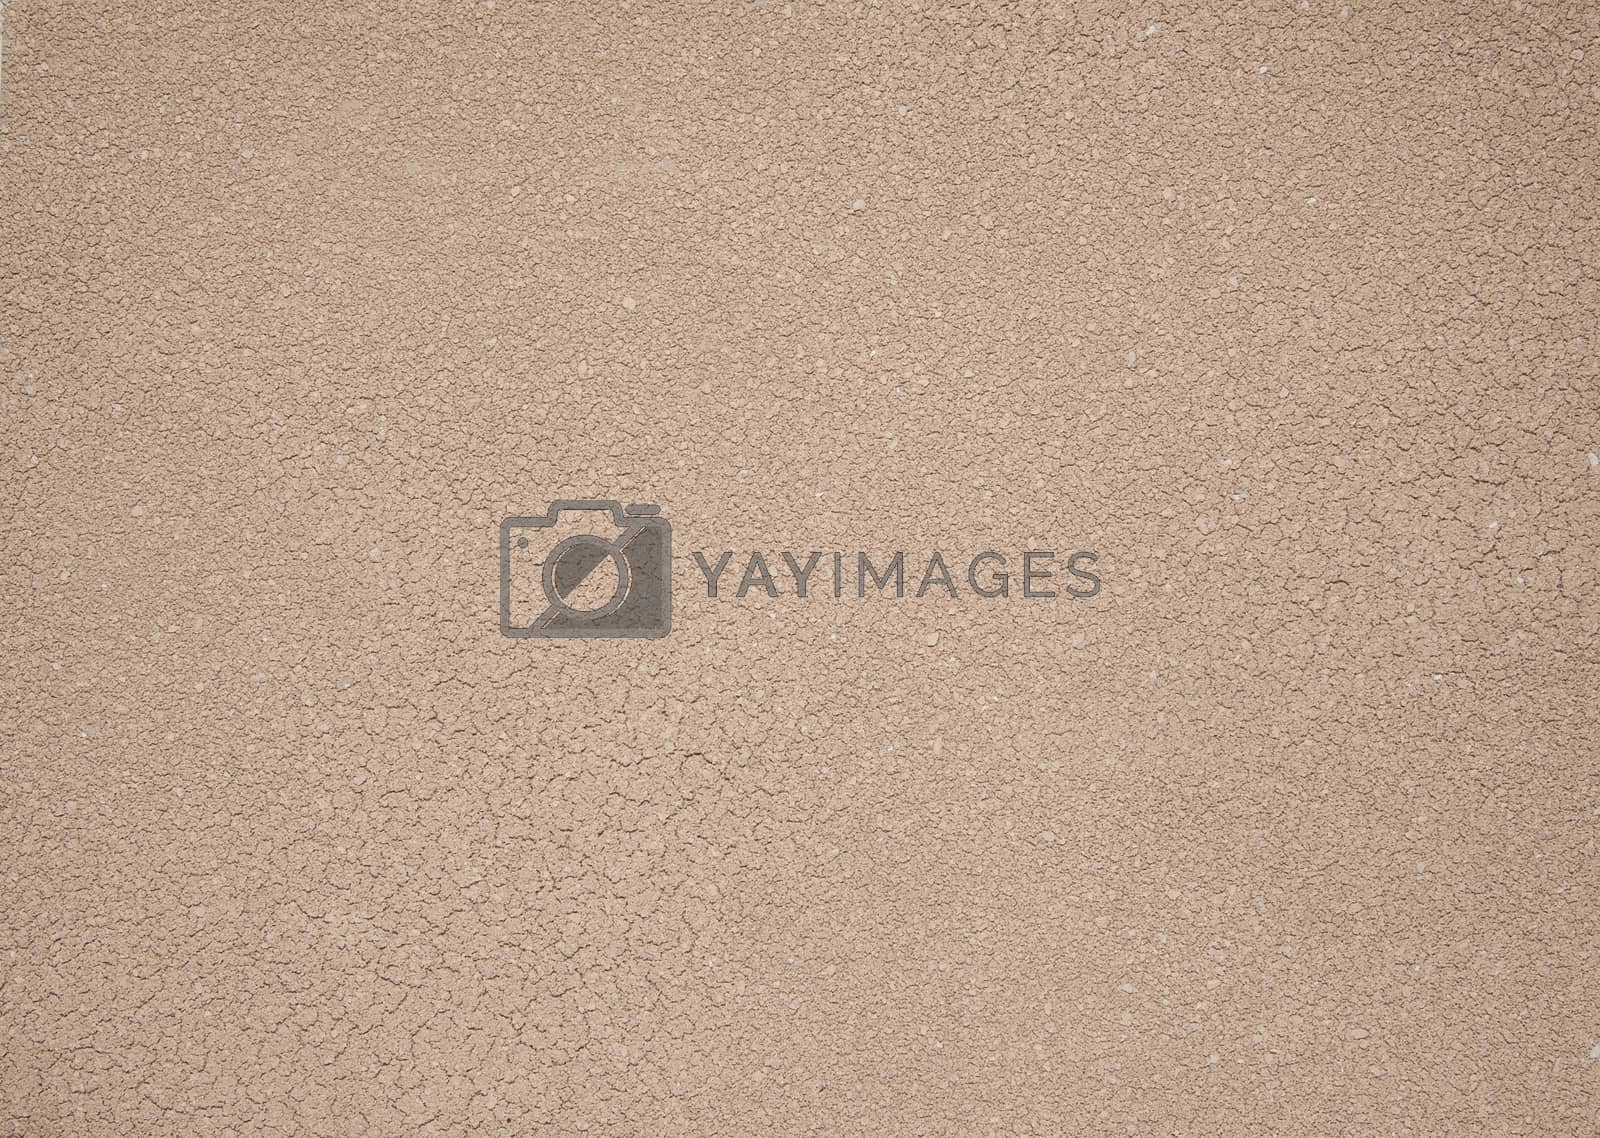 Royalty free image of plaster background by A_Karim